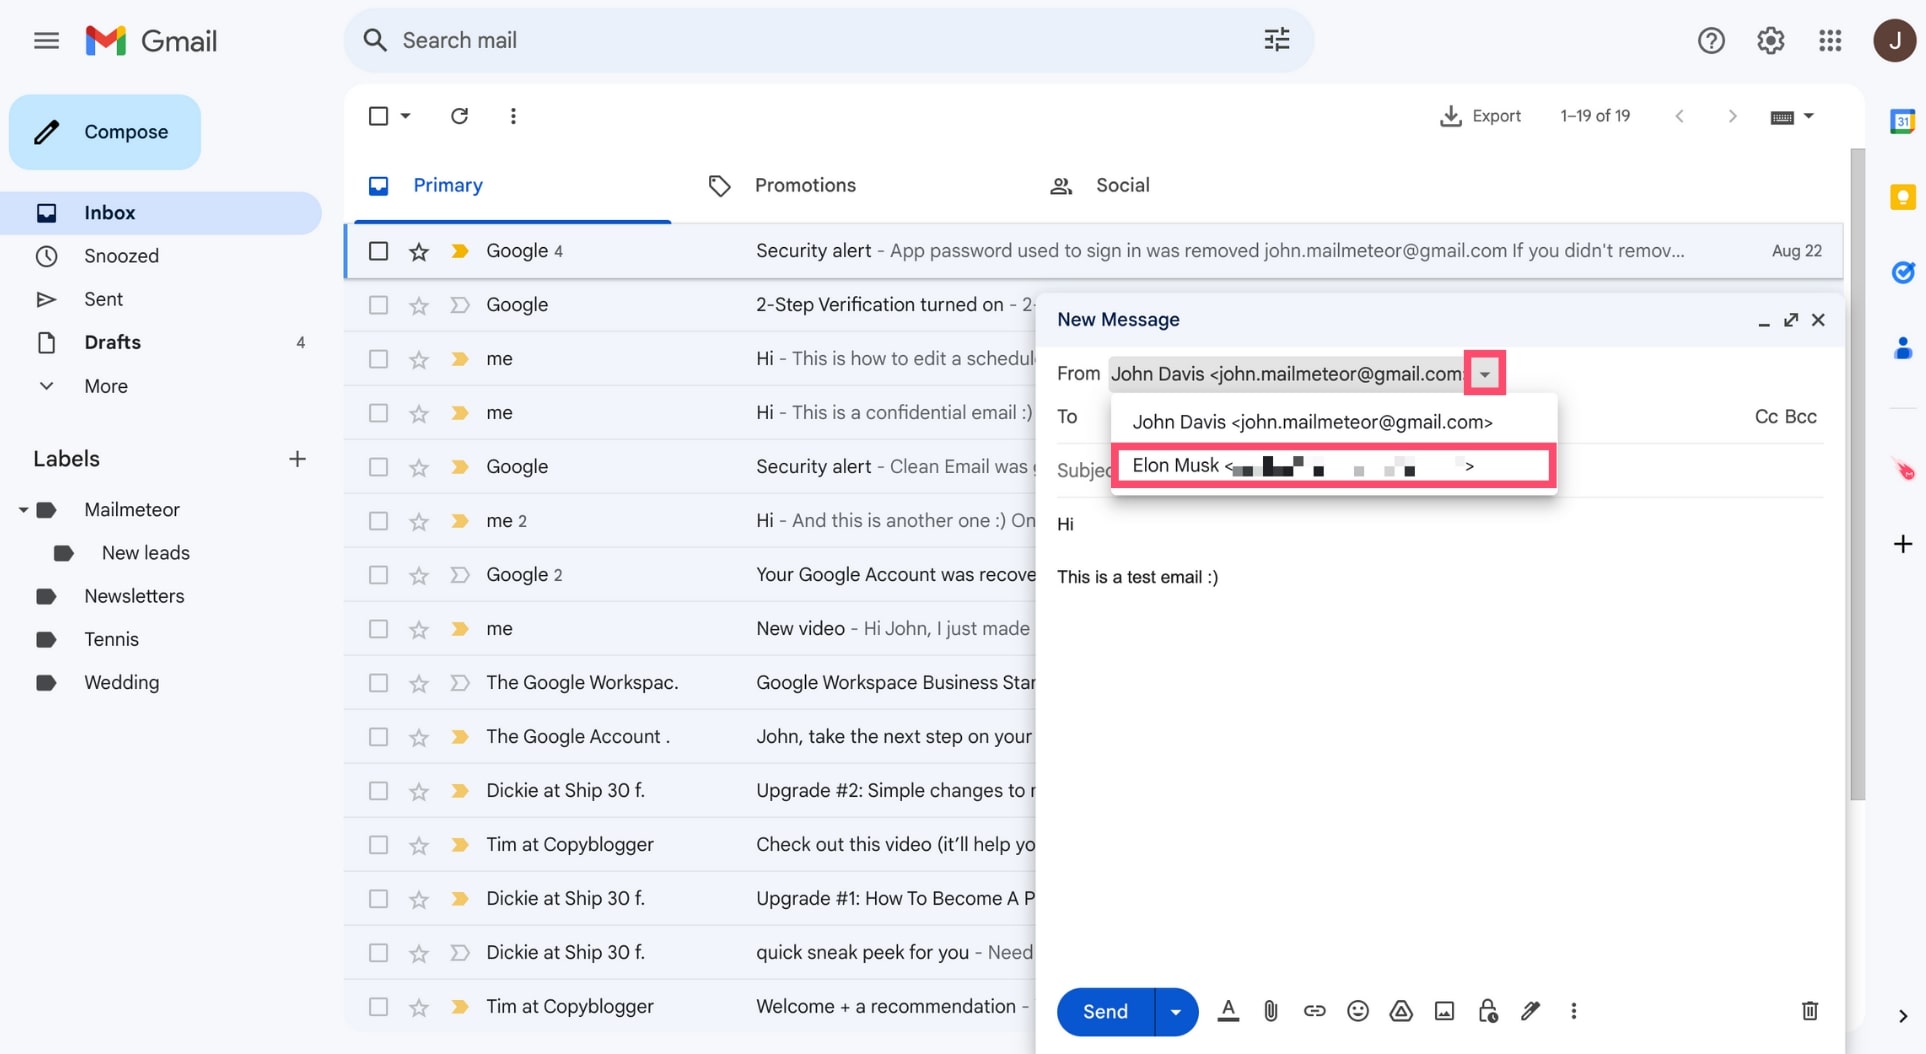 How to send an email from a Gmail alias